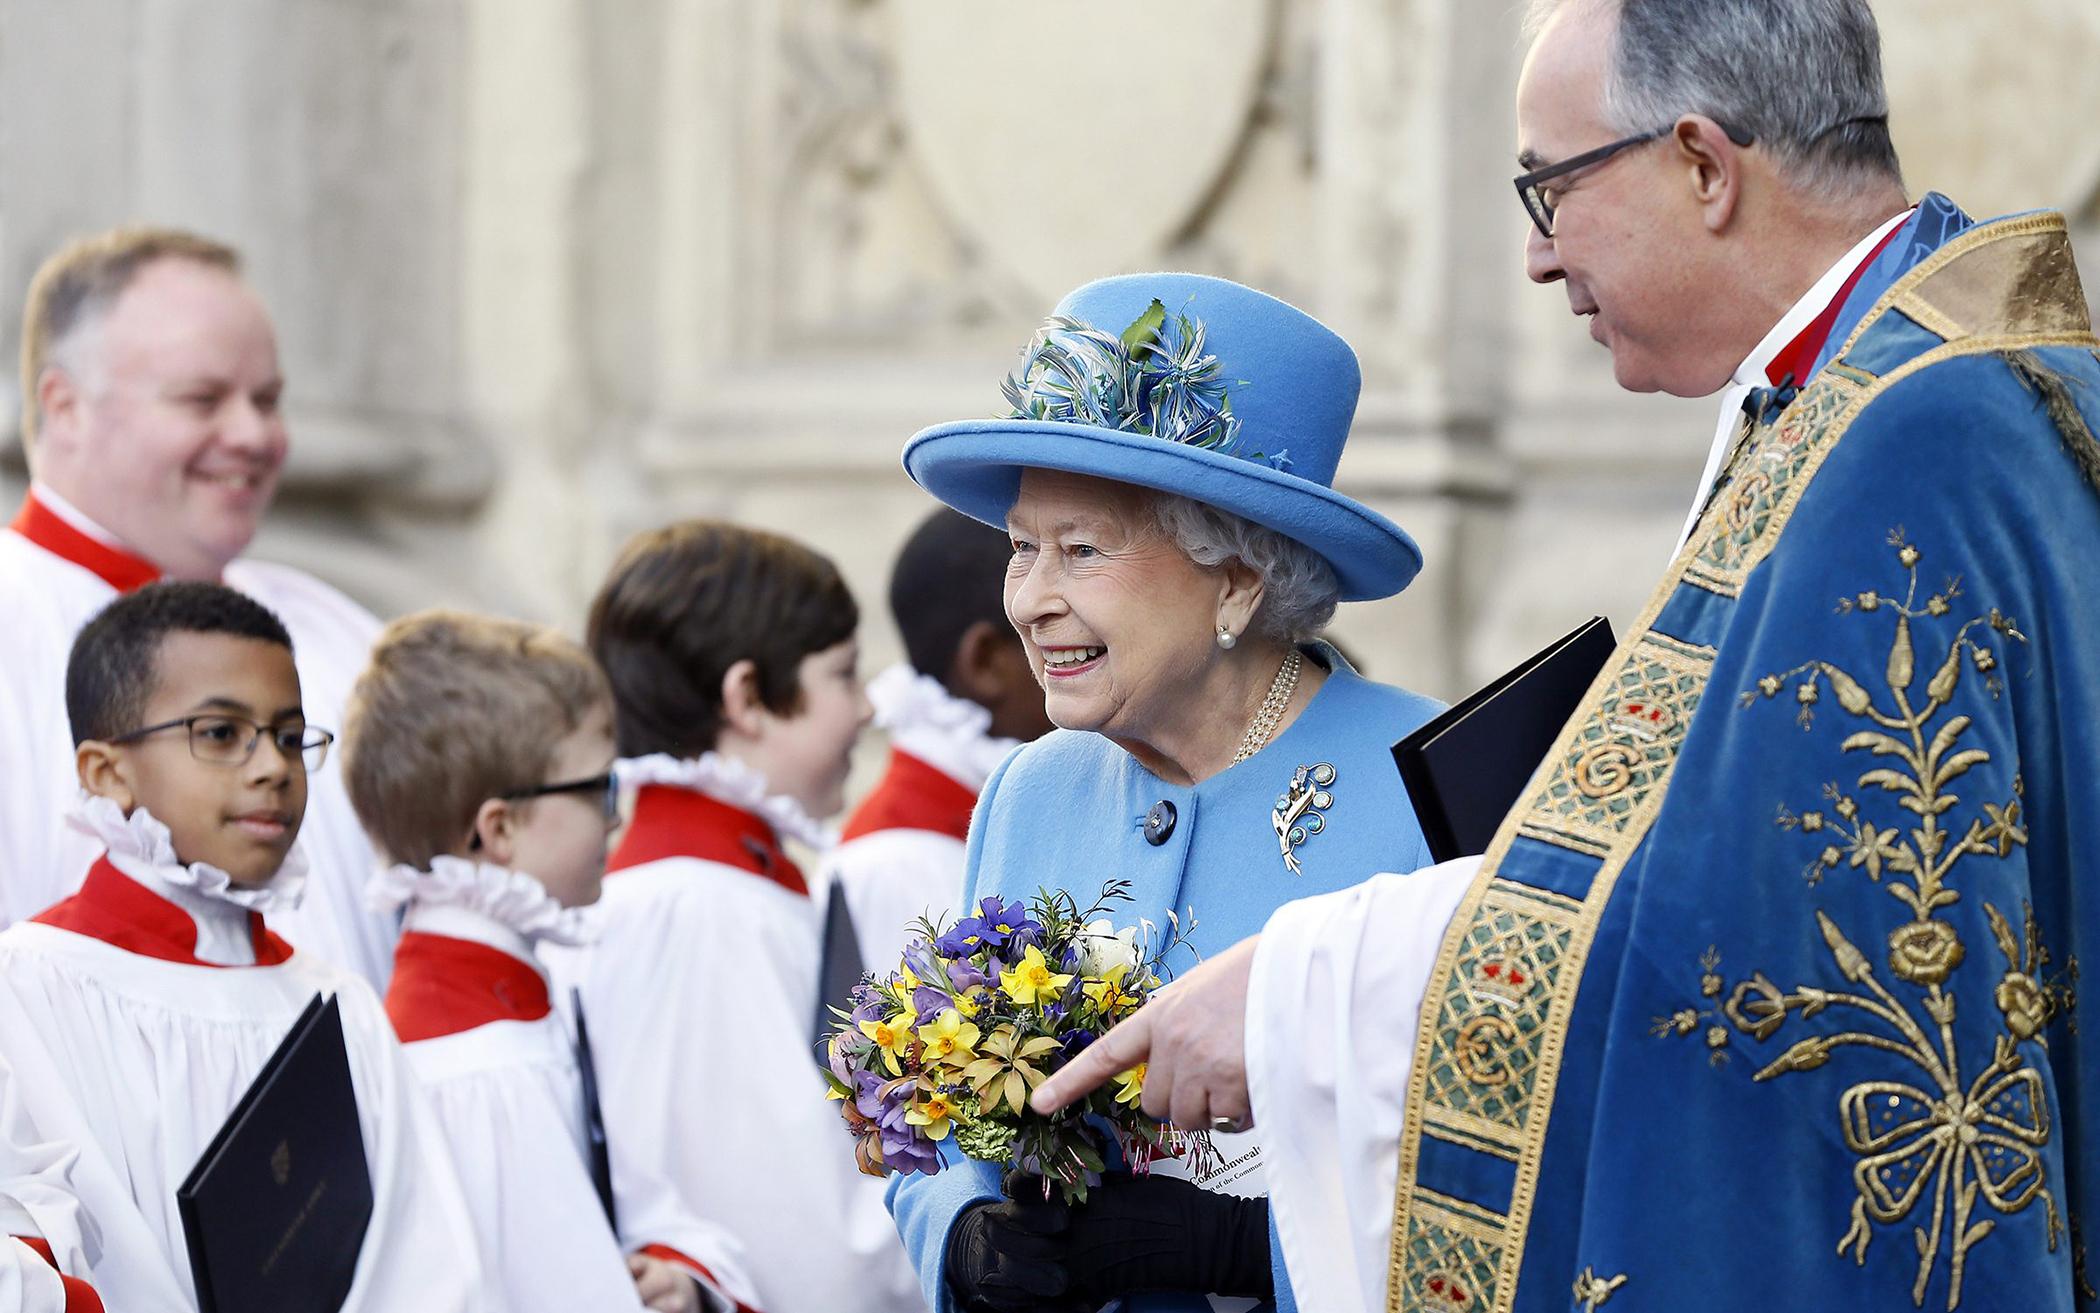 In London, March 14, 2016, Queen Elizabeth II passes the choir as she leaves after attending the Commonwealth Day service at Westminster Abbey.